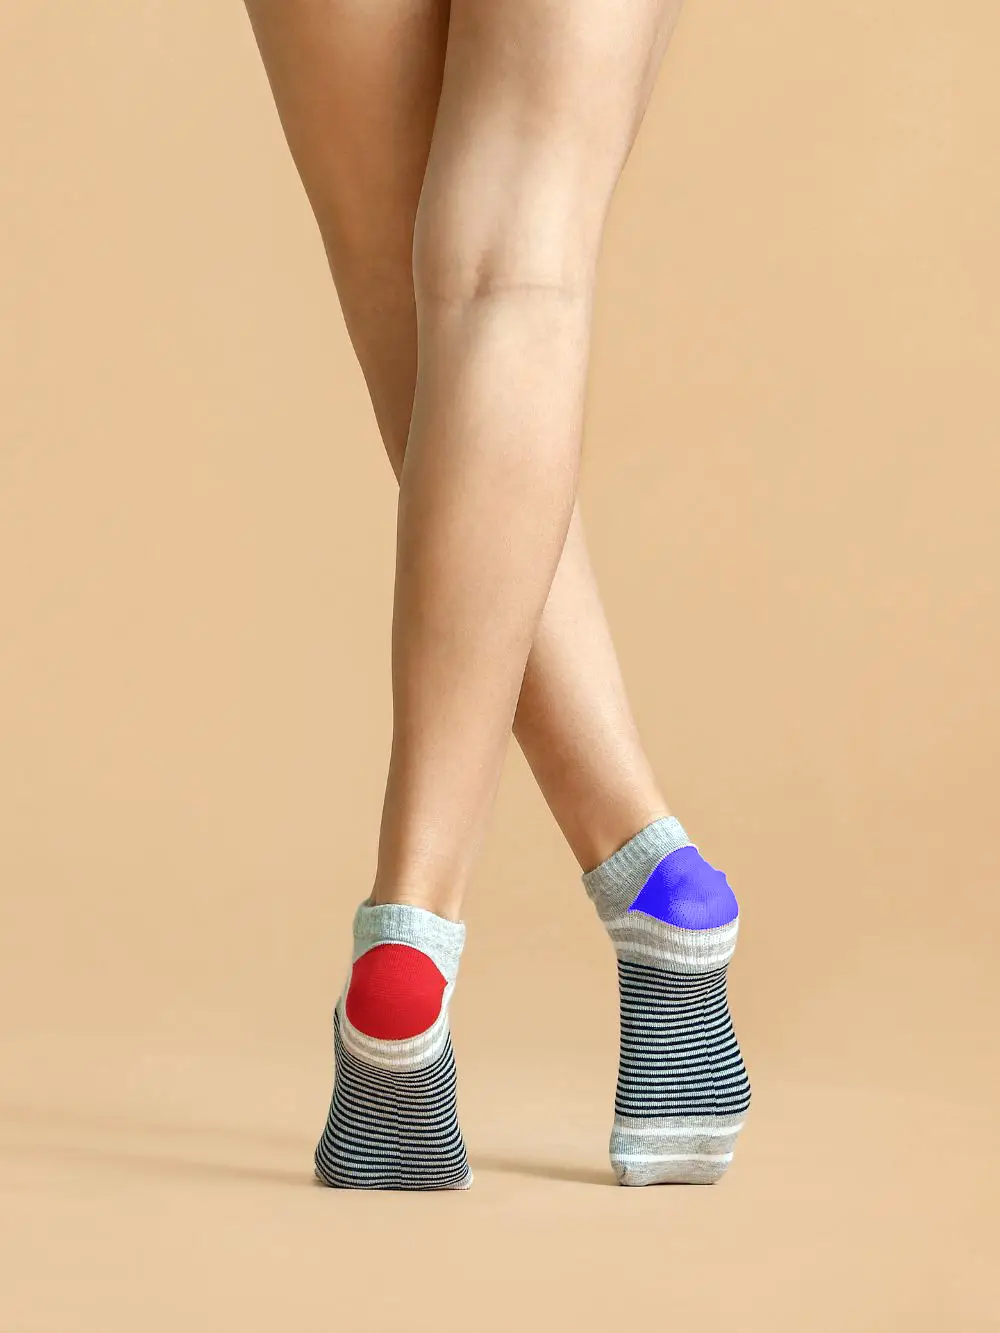 Girl wearing two different socks